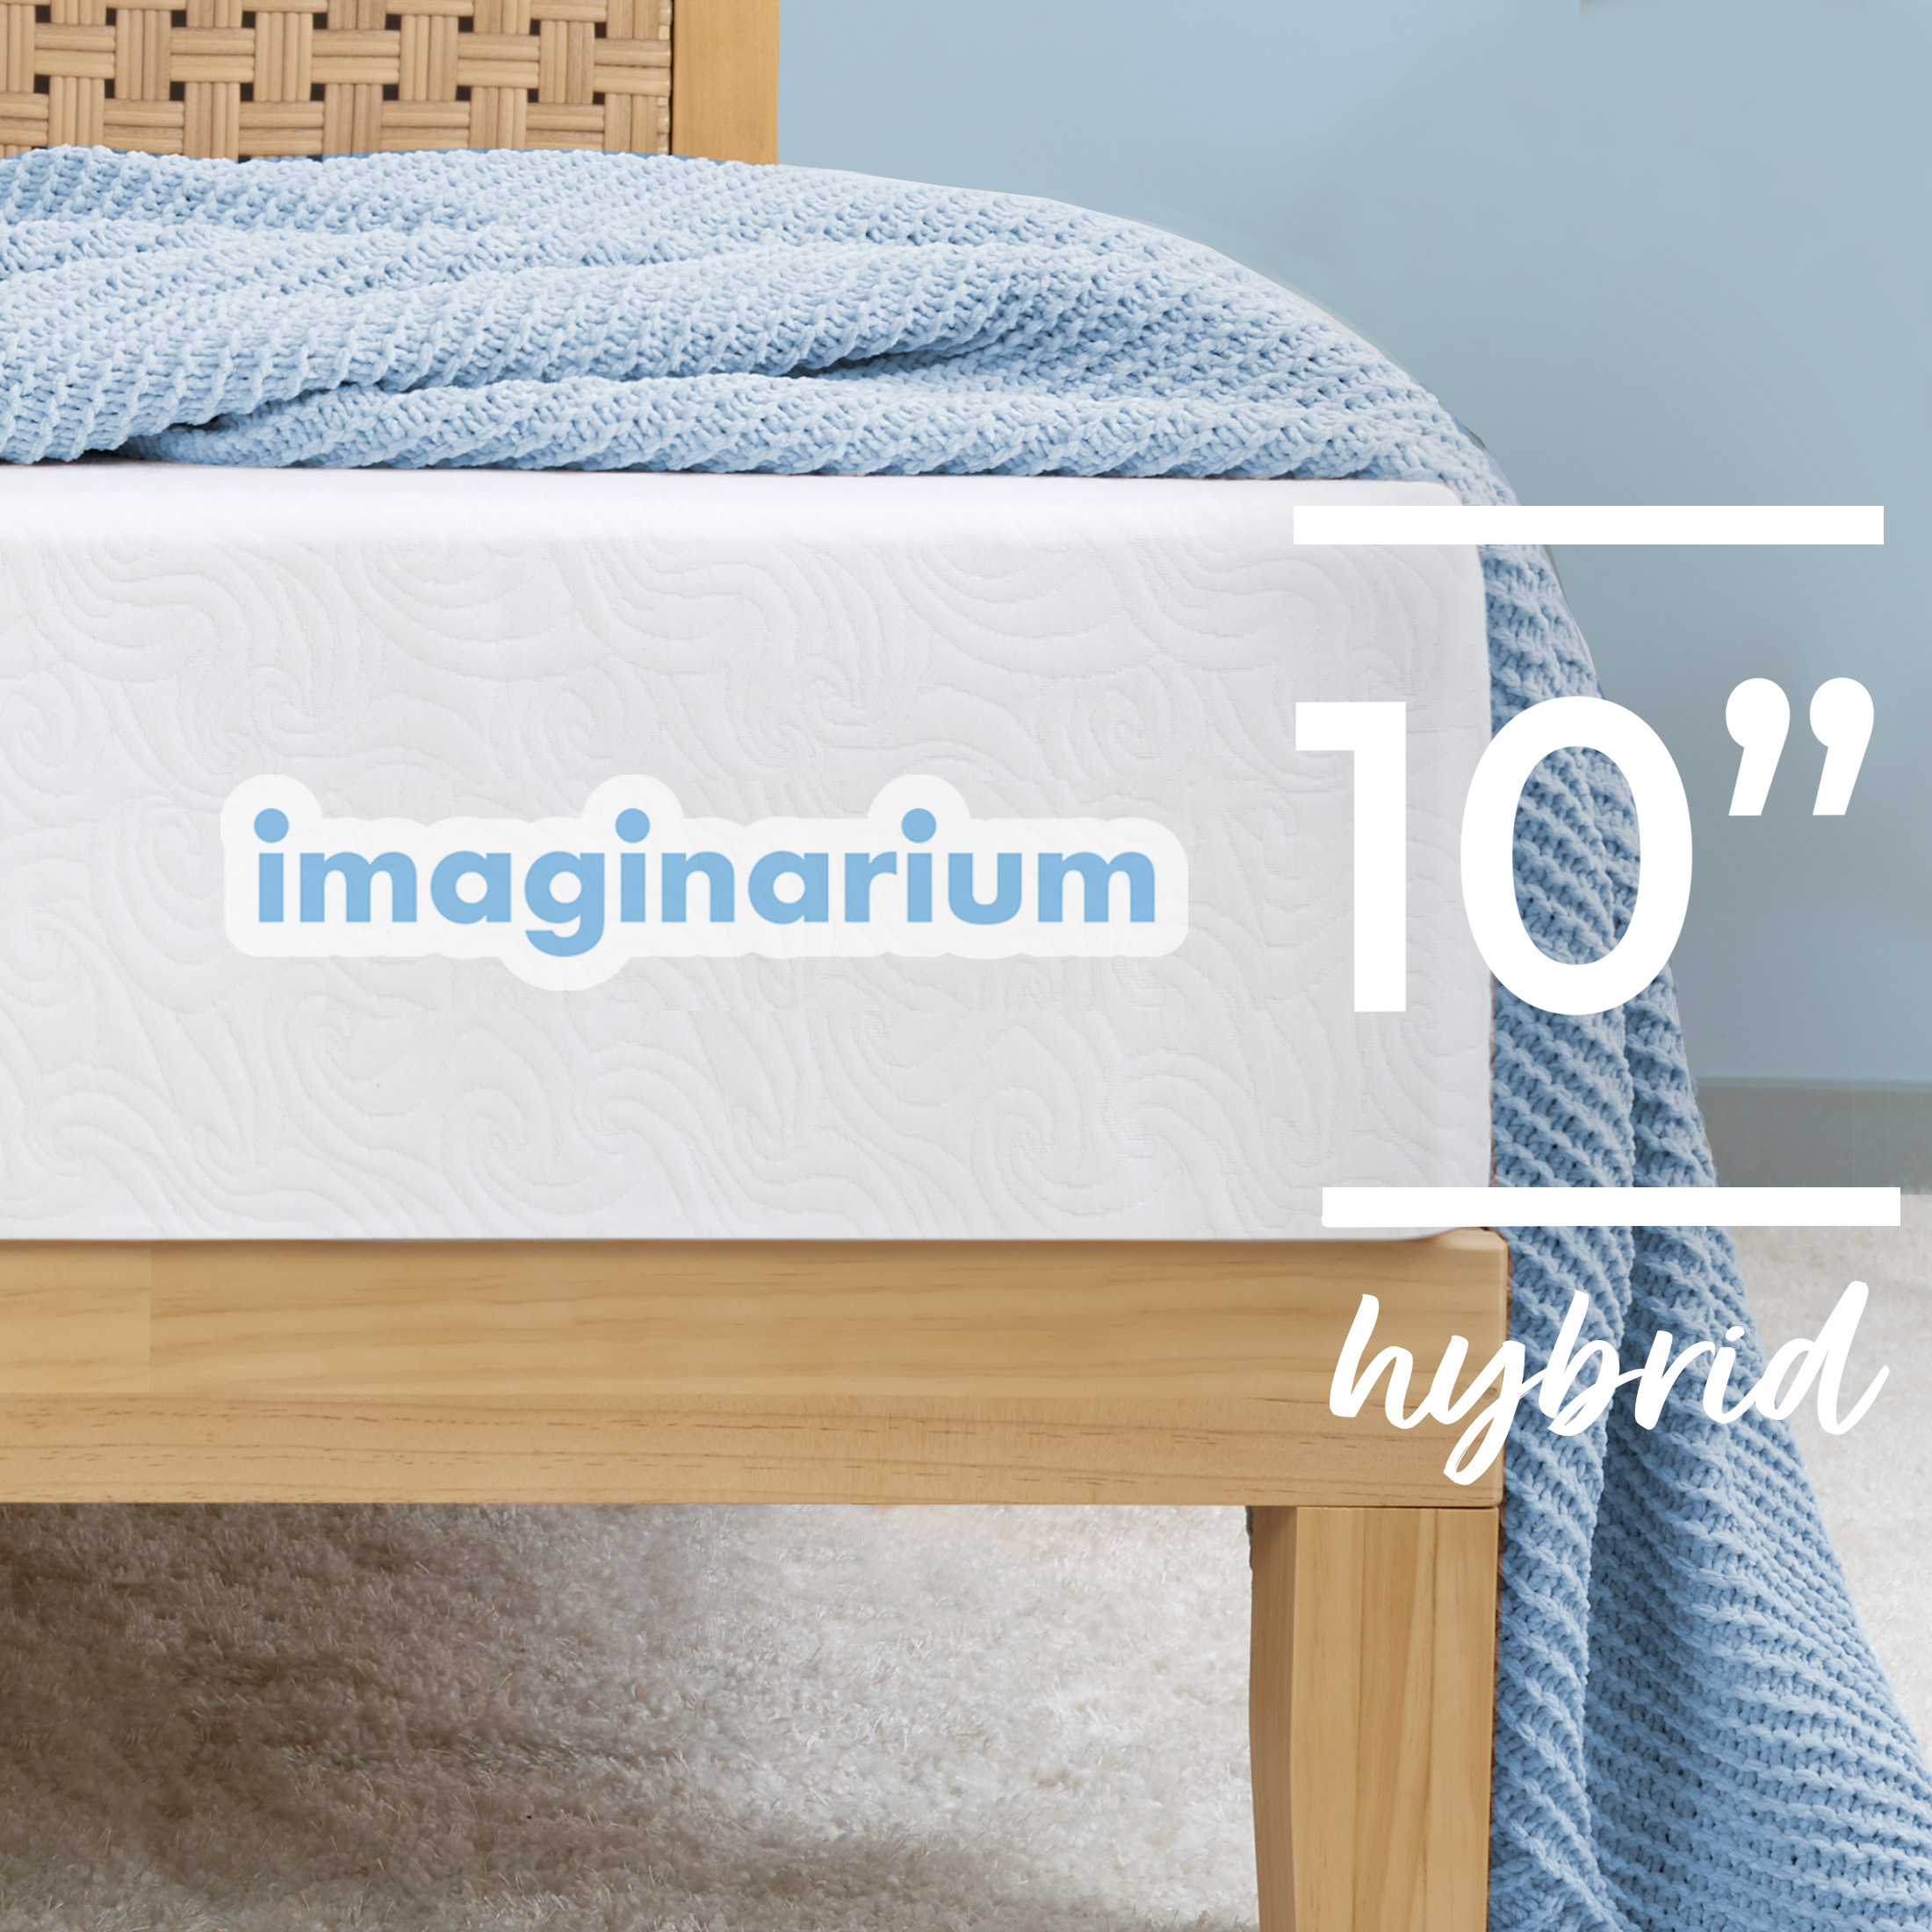 Imaginarium 10" Hybrid of Memory Foam and Coils Mattress with Antimicrobial Treated Cover, King - image 4 of 6